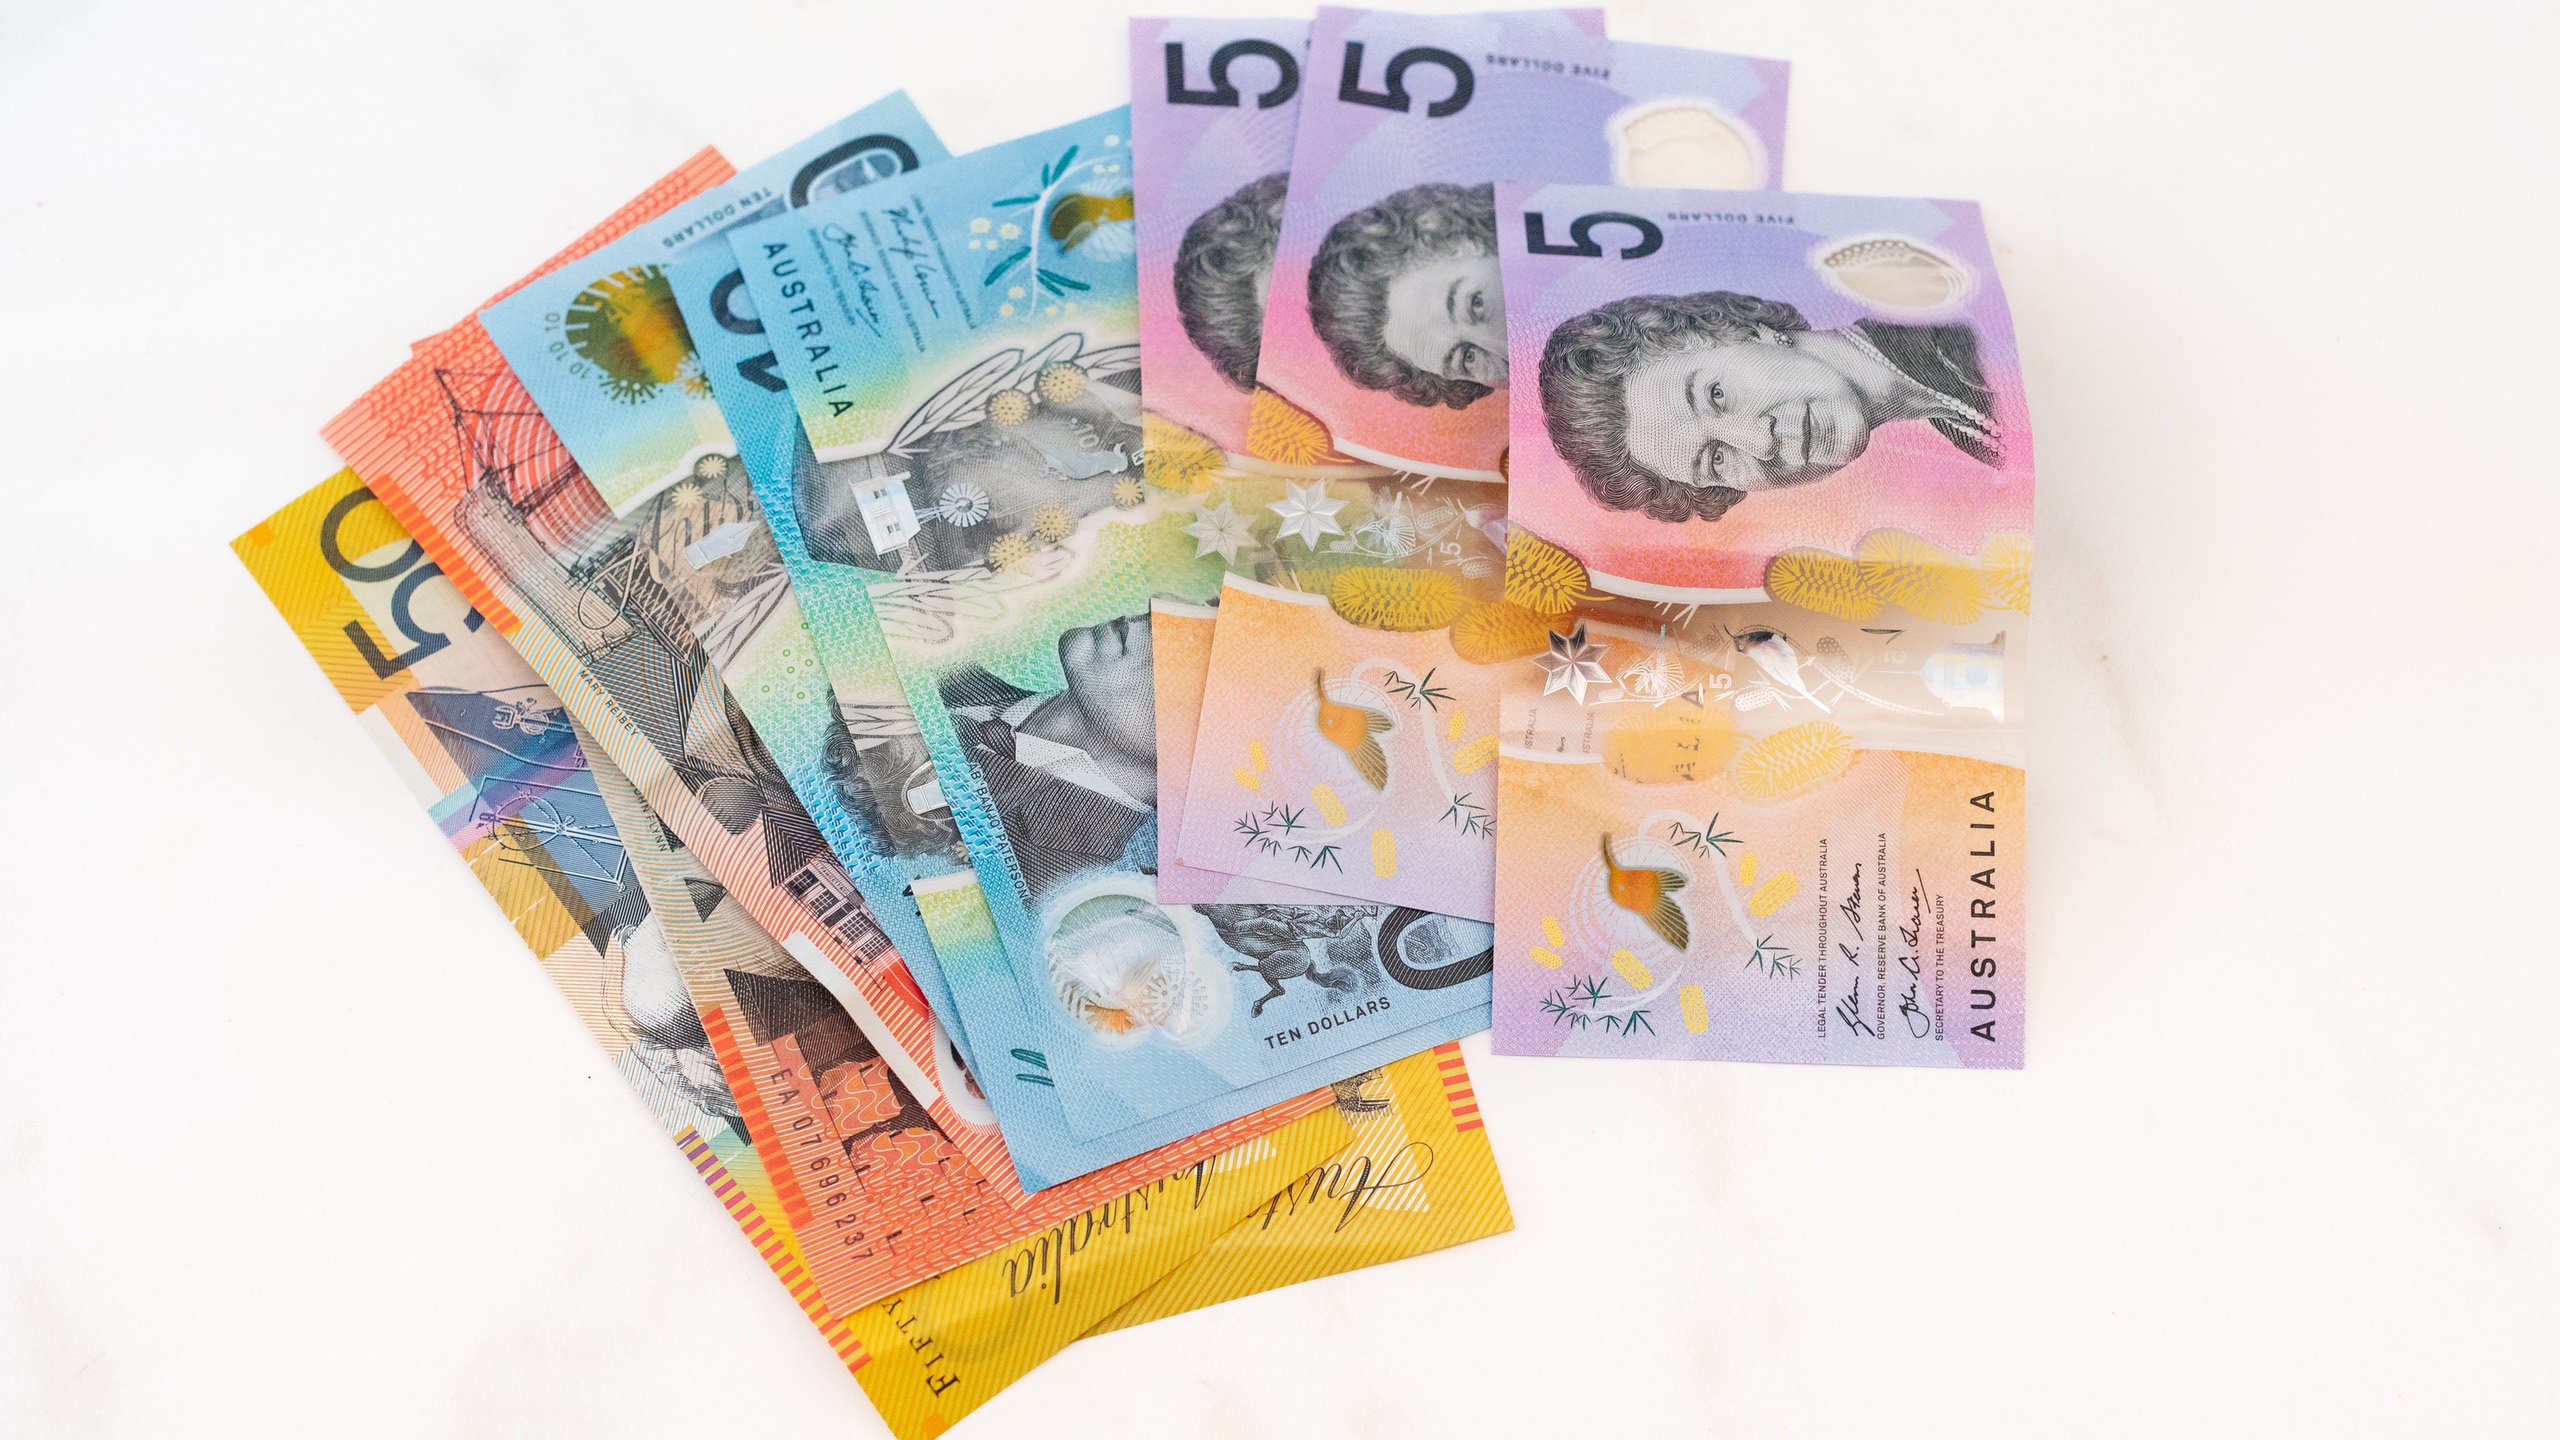 Assortment of Australian bank notes on a white table